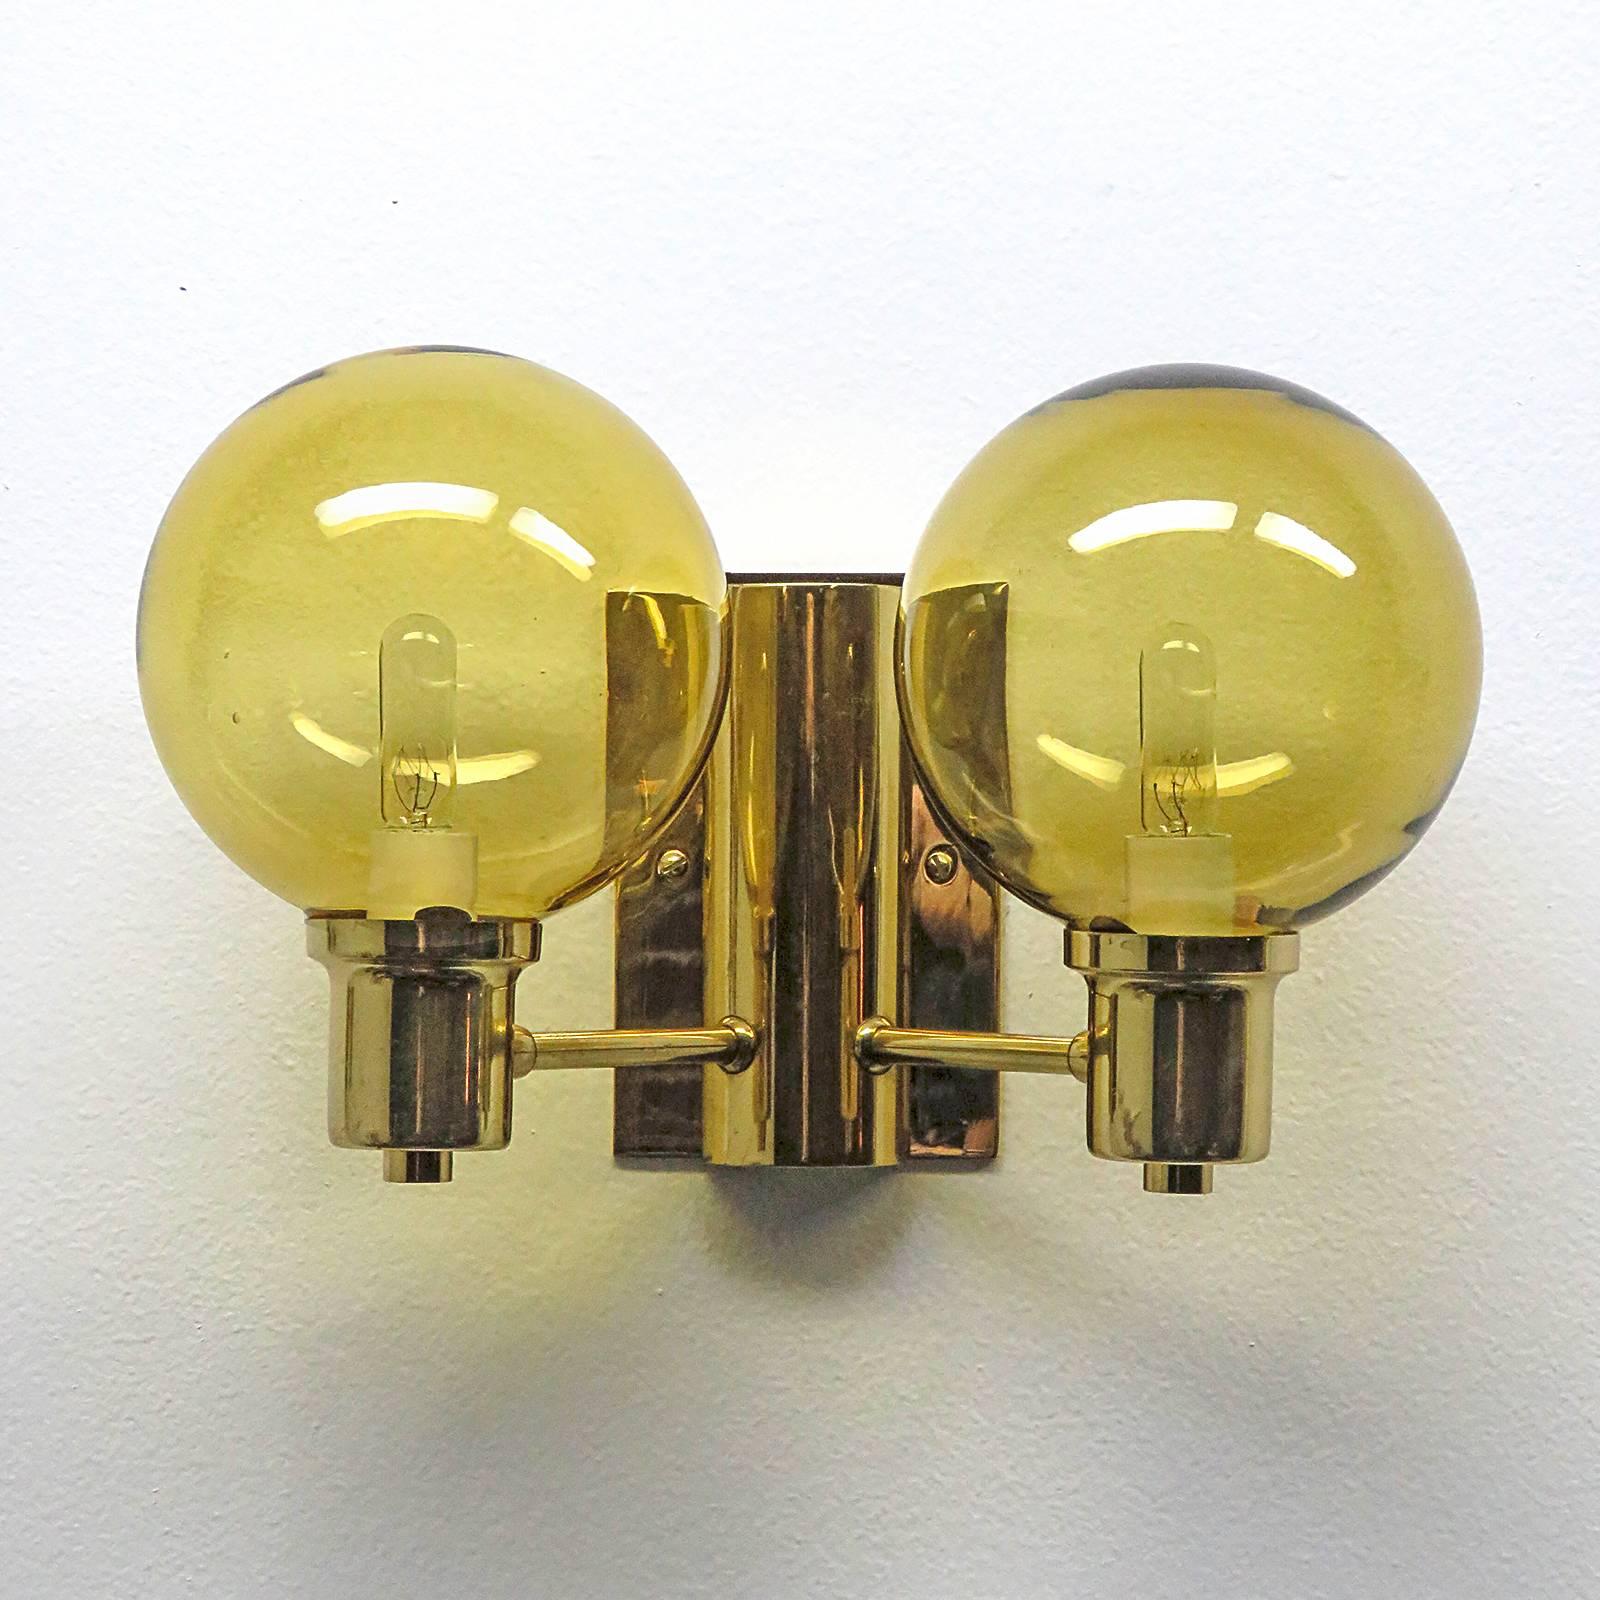 Wonderful Swedish double arm wall lights by Hans Agne Jakobsen with amber colored cut glass shades, custom backplate for US j-boxes, rewired for US, two E12 sockets per fixture, max. wattage 40w per socket, bulbs provided as a one time courtesy.